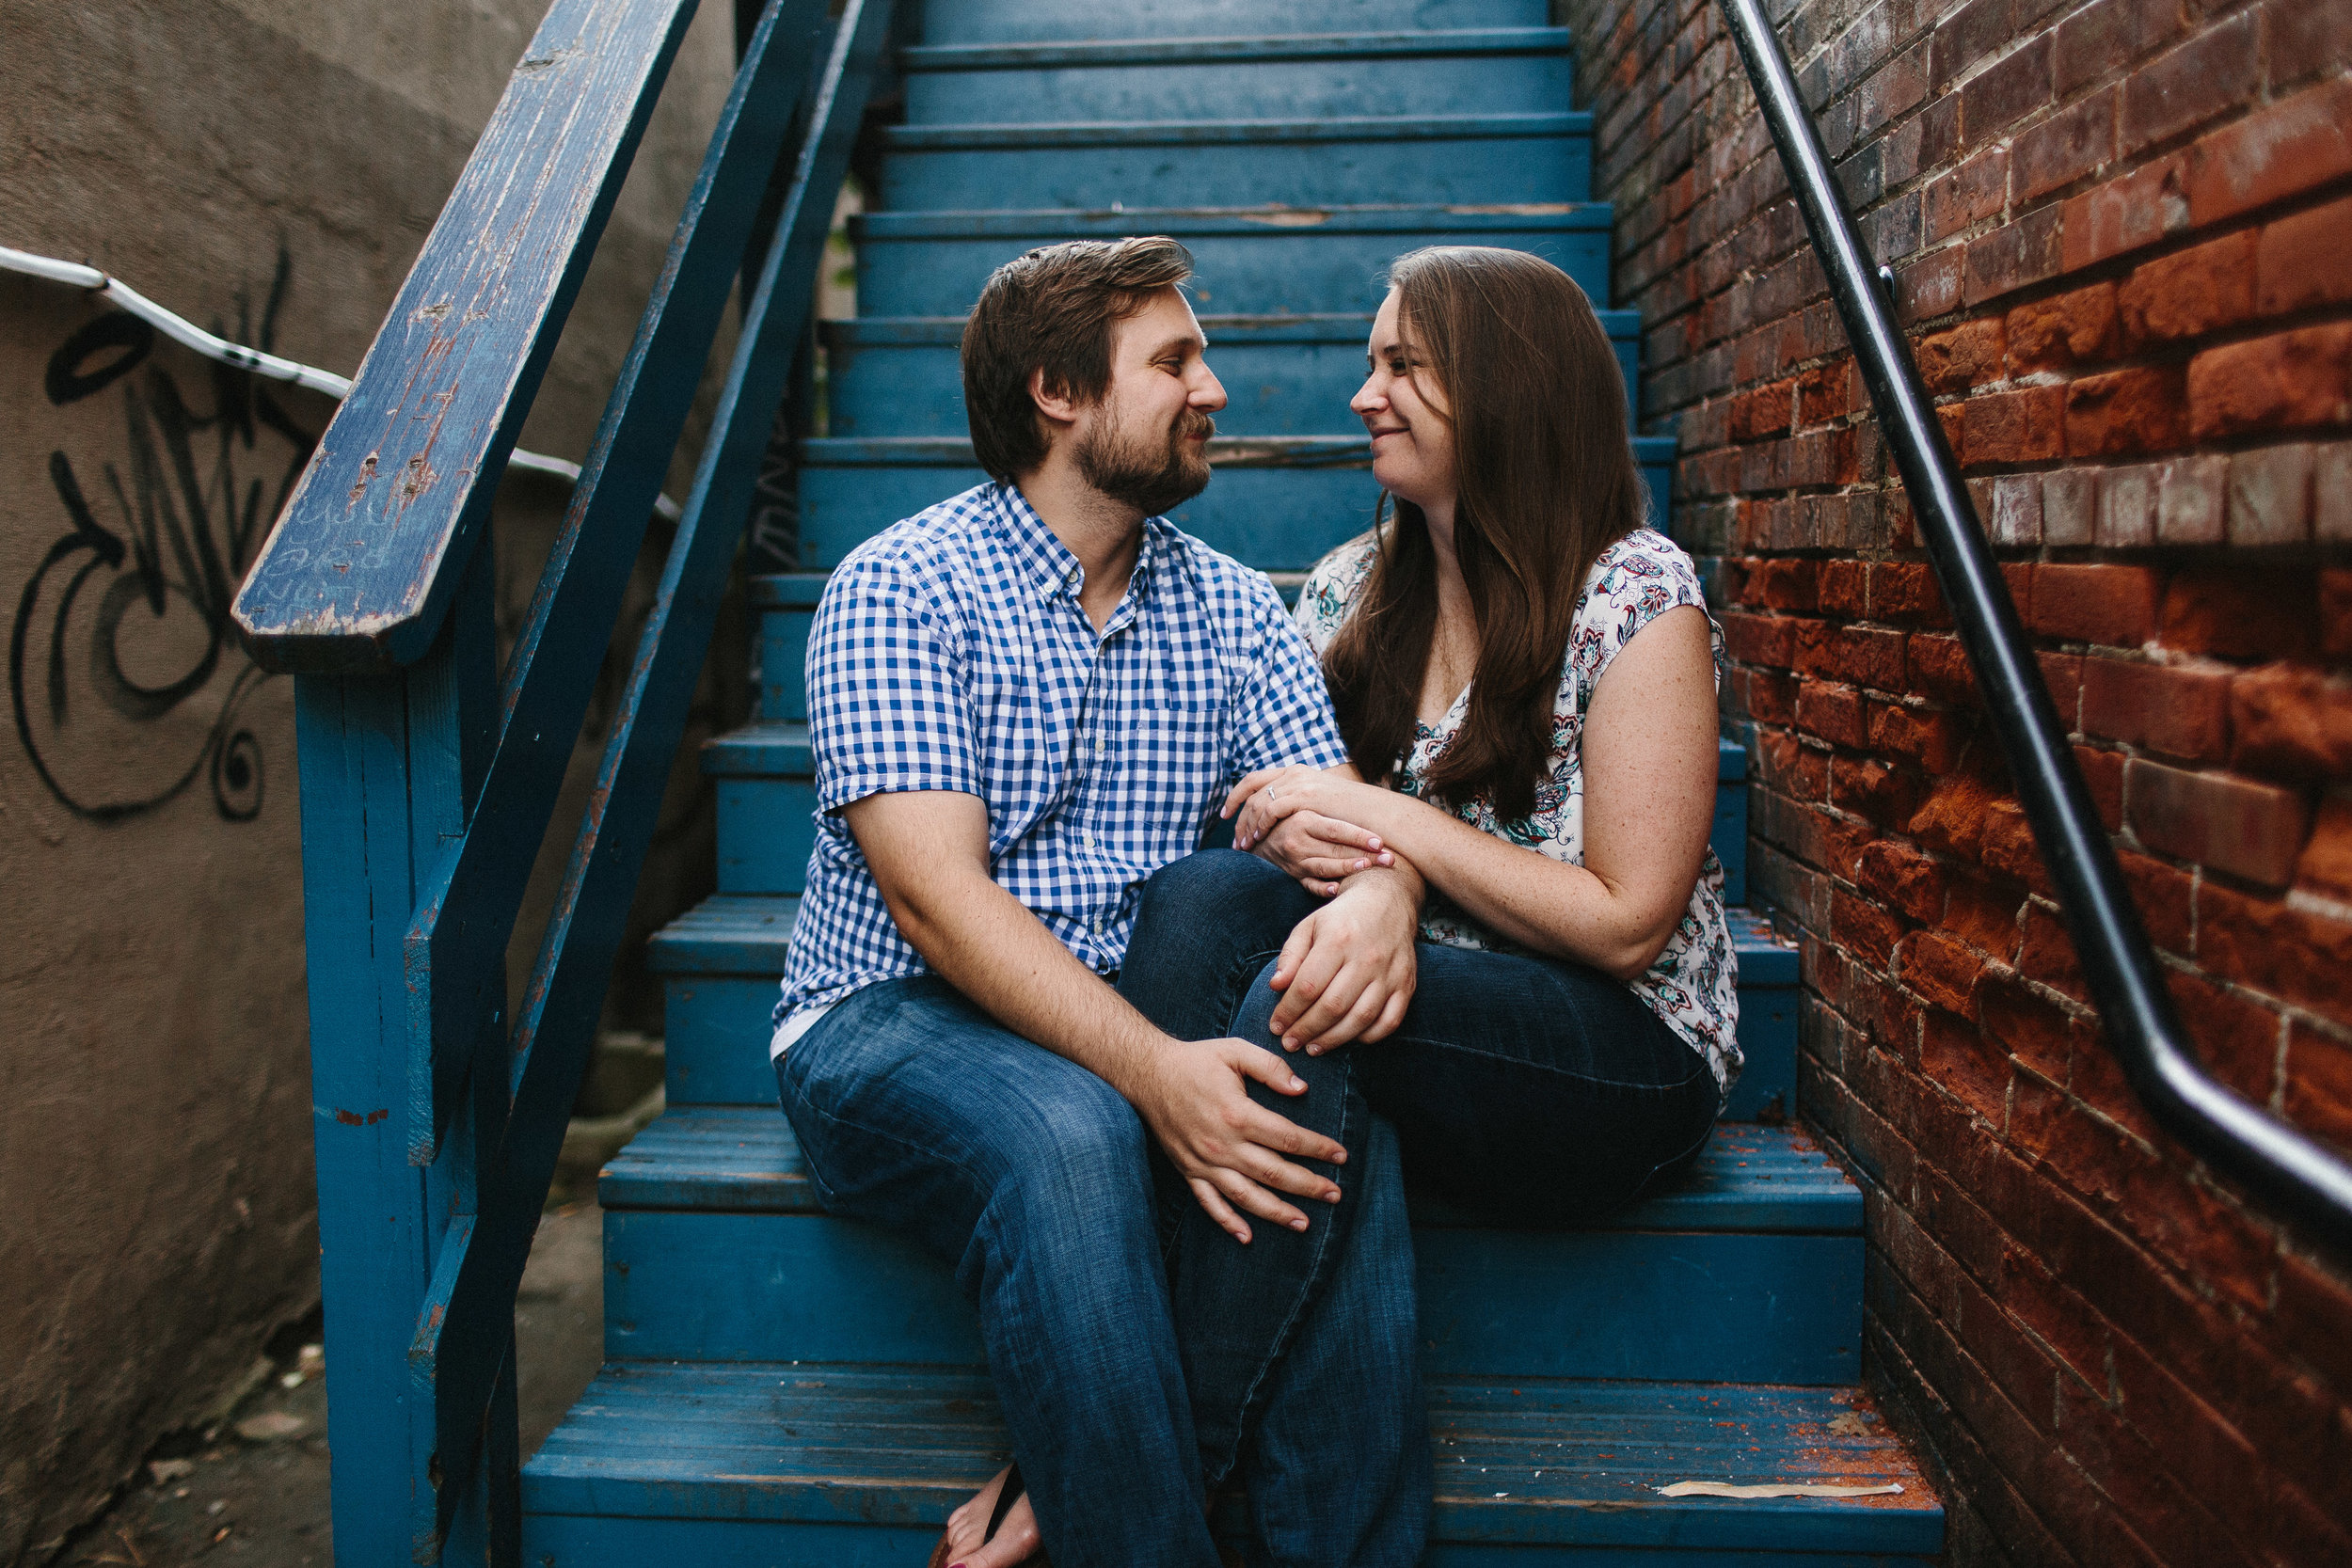 iowa_city_engagement_adventure_prairie_graduate_at_home_dog_couples_downtown_wilsons_orchard_1123.jpg